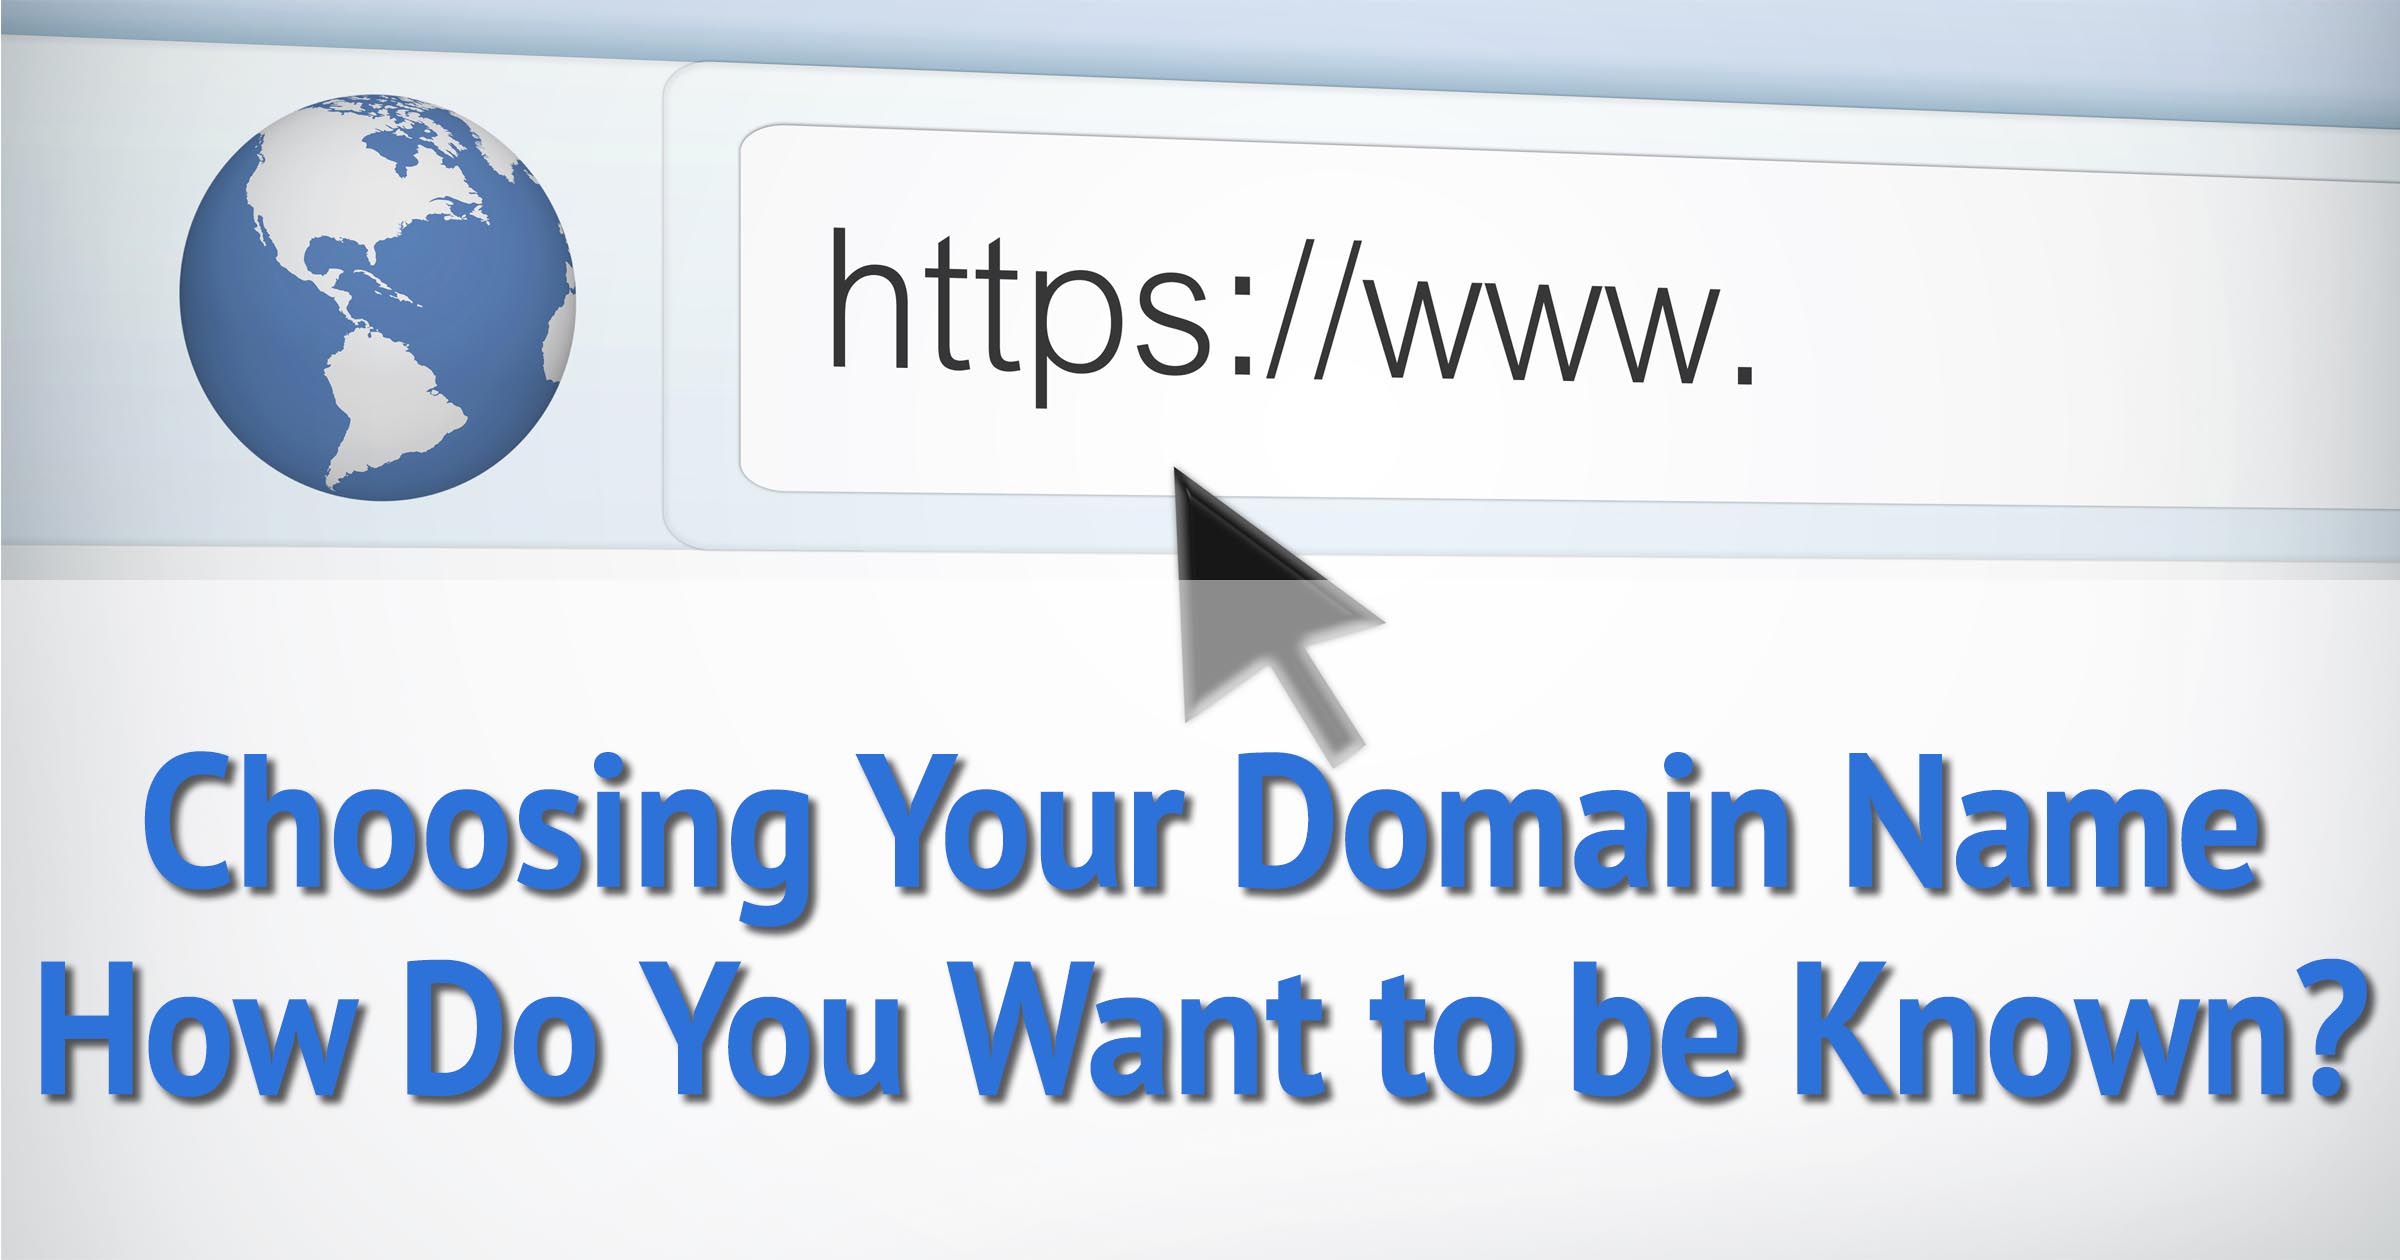 Choosing Your Domain Name - How Do You Want to be Known?